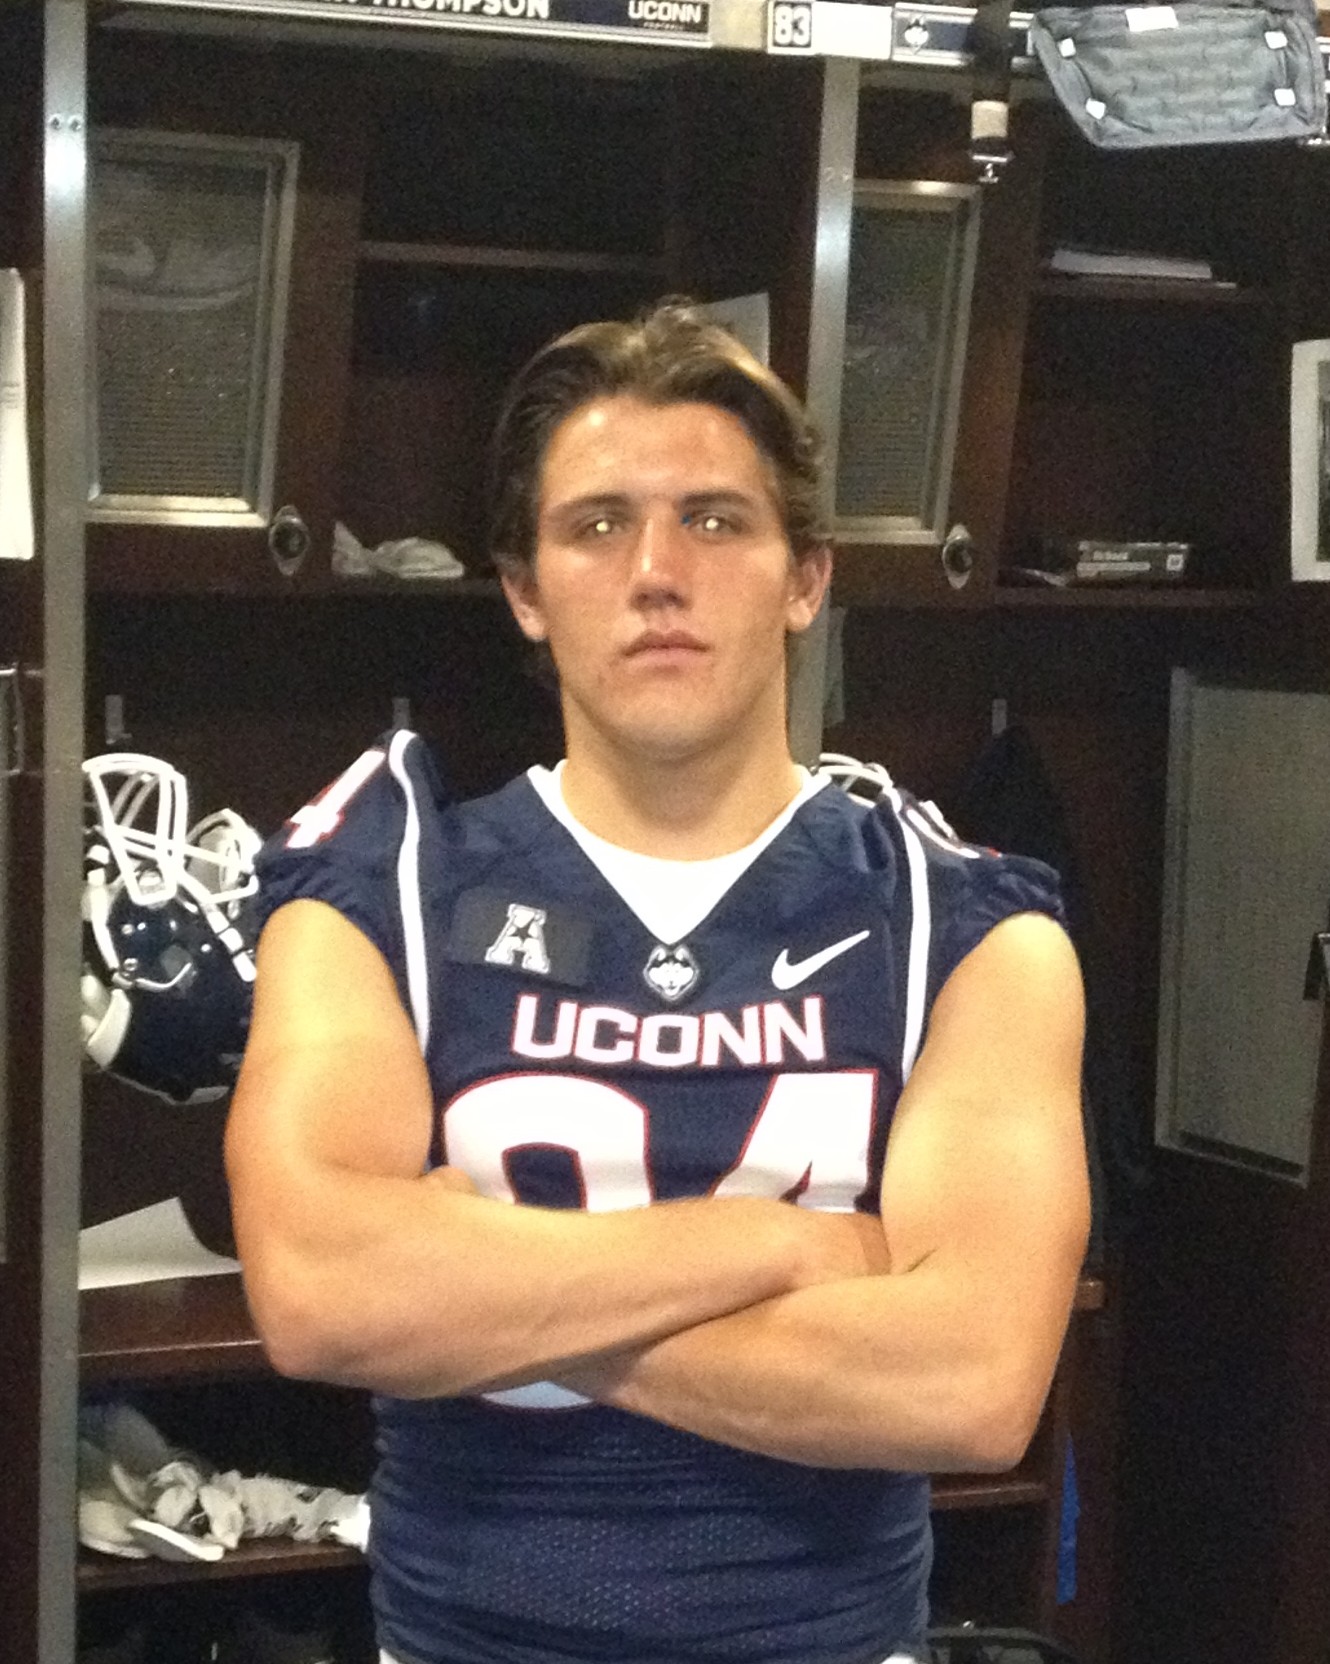 Old Lyme’s Harrison Recruited to Play Football at UConn